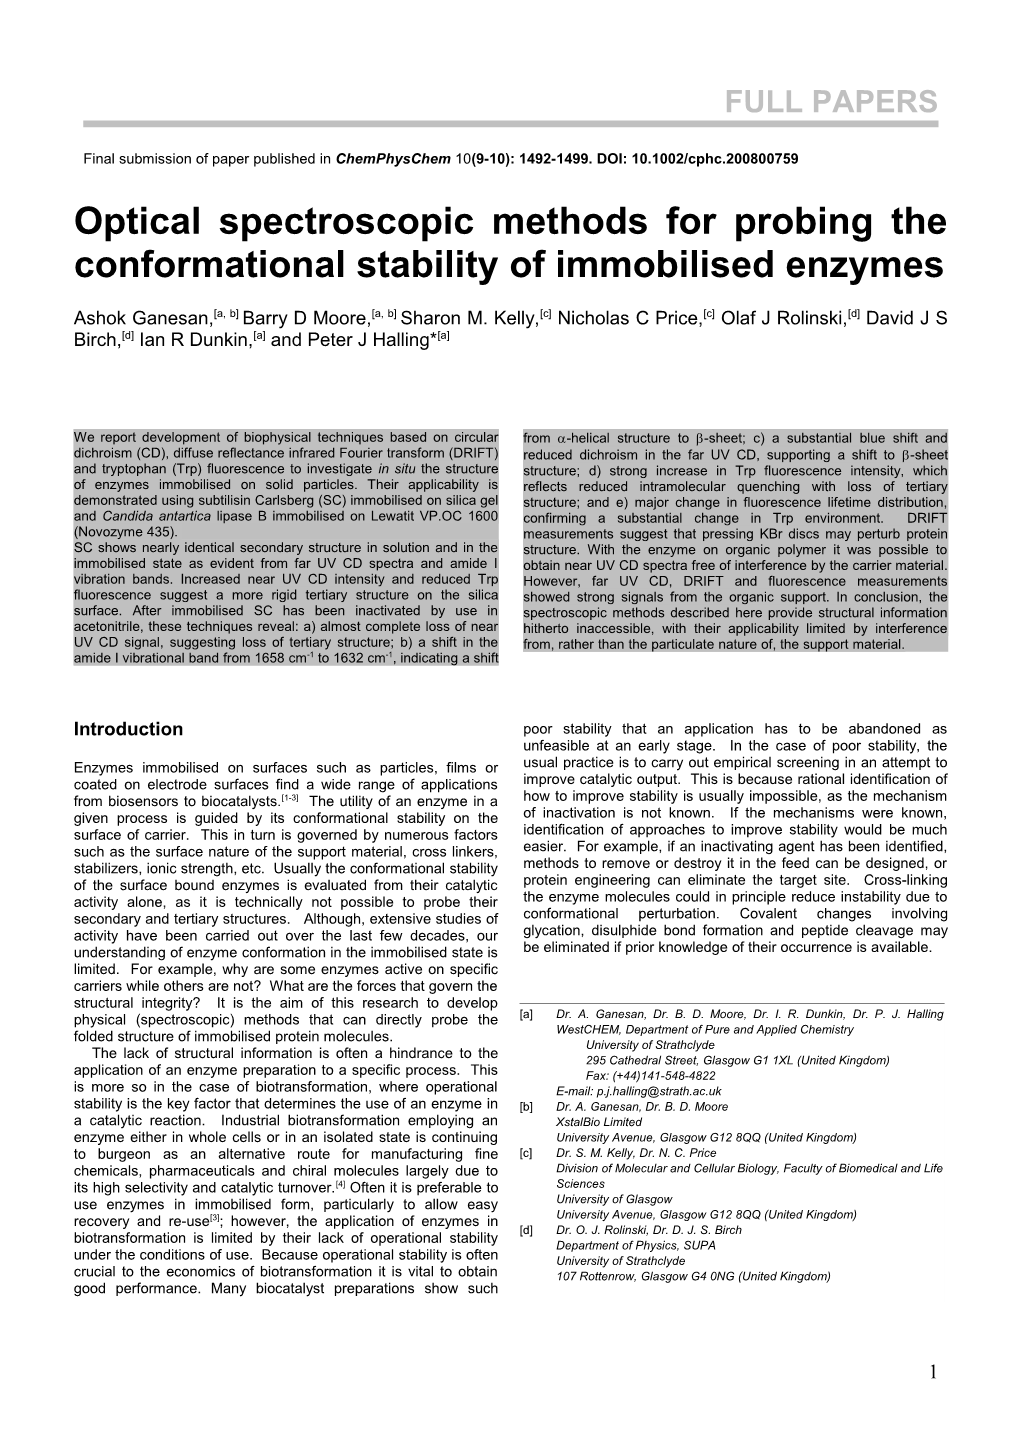 Optical Spectroscopic Methods for Probing the Conformational Stability of Immobilised Enzymes